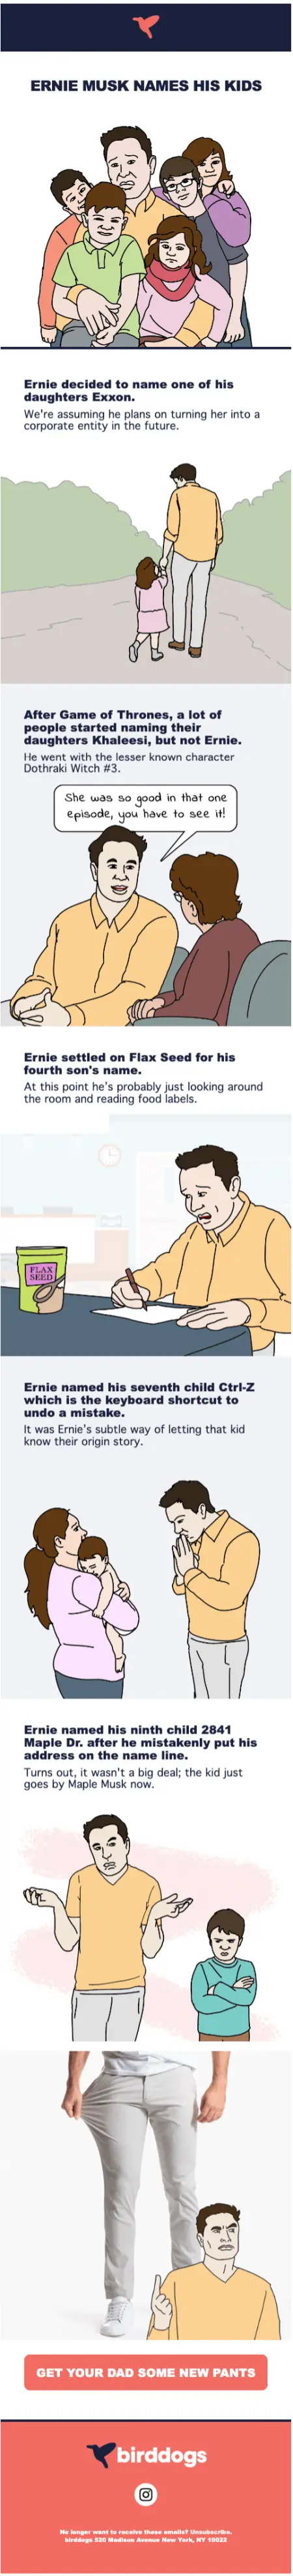 Image shows a Father’s Day email newsletter from menswear brand Birddogs, featuring a zany illustrated comic strip about Elon Musk’s fake brother Ernie and what he named his imaginary children. The CTA at the bottom of the email reads, “Get your dad some new pants.”